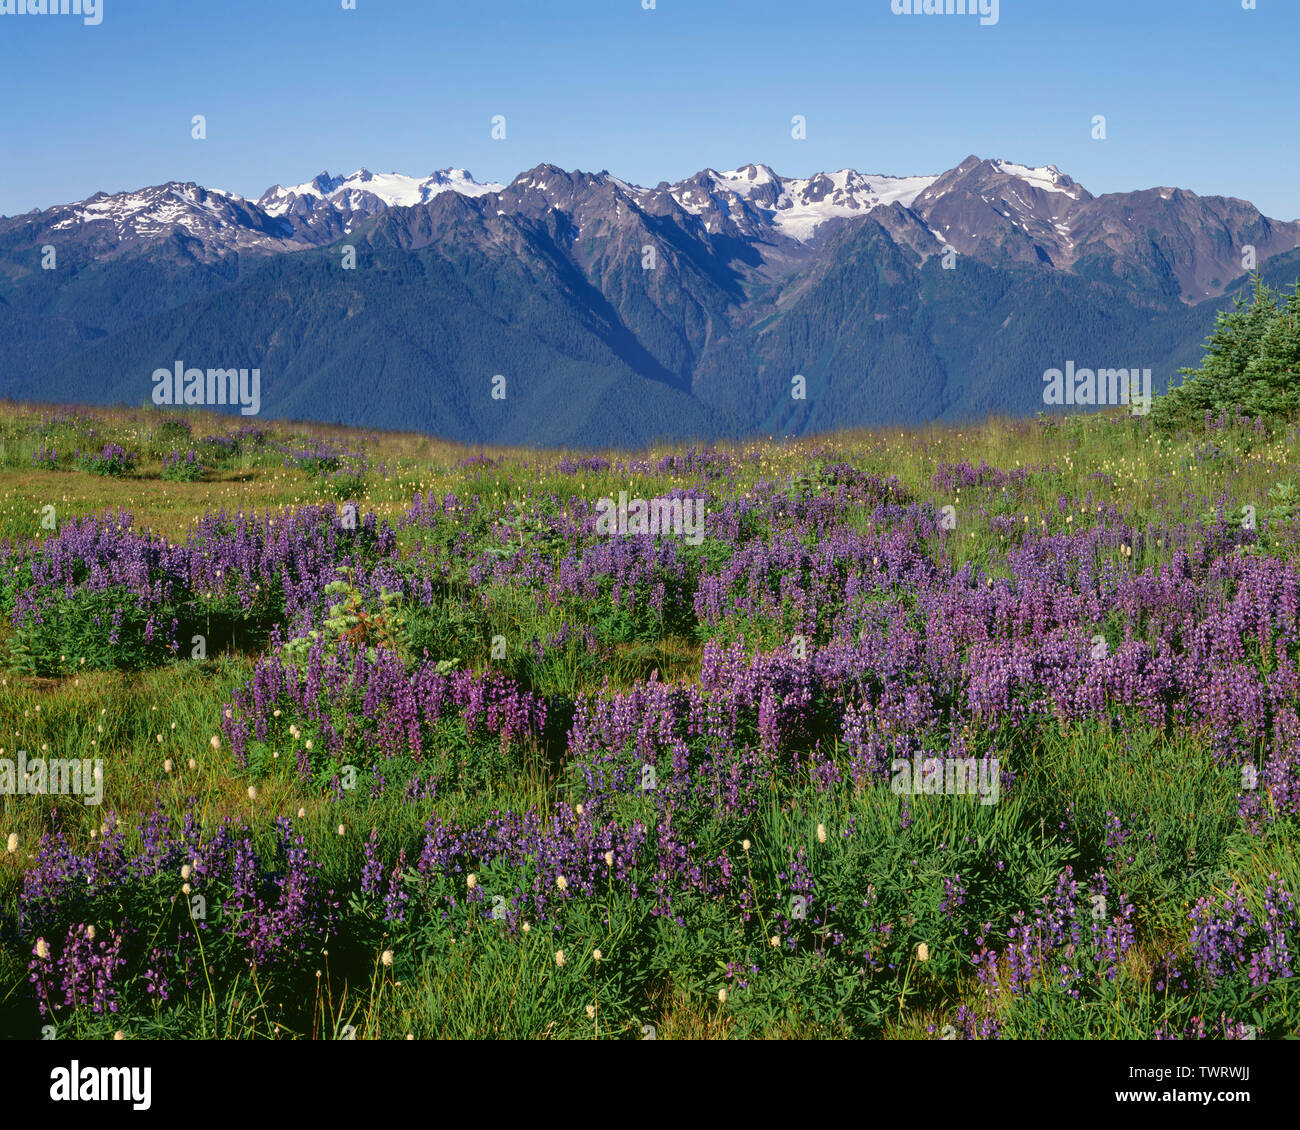 USA, Washington, Olympic National Park, Lupine blooms at Hurricane Ridge with distant Mt. Olympus (left) and peaks of the Bailey Range (right). Stock Photo